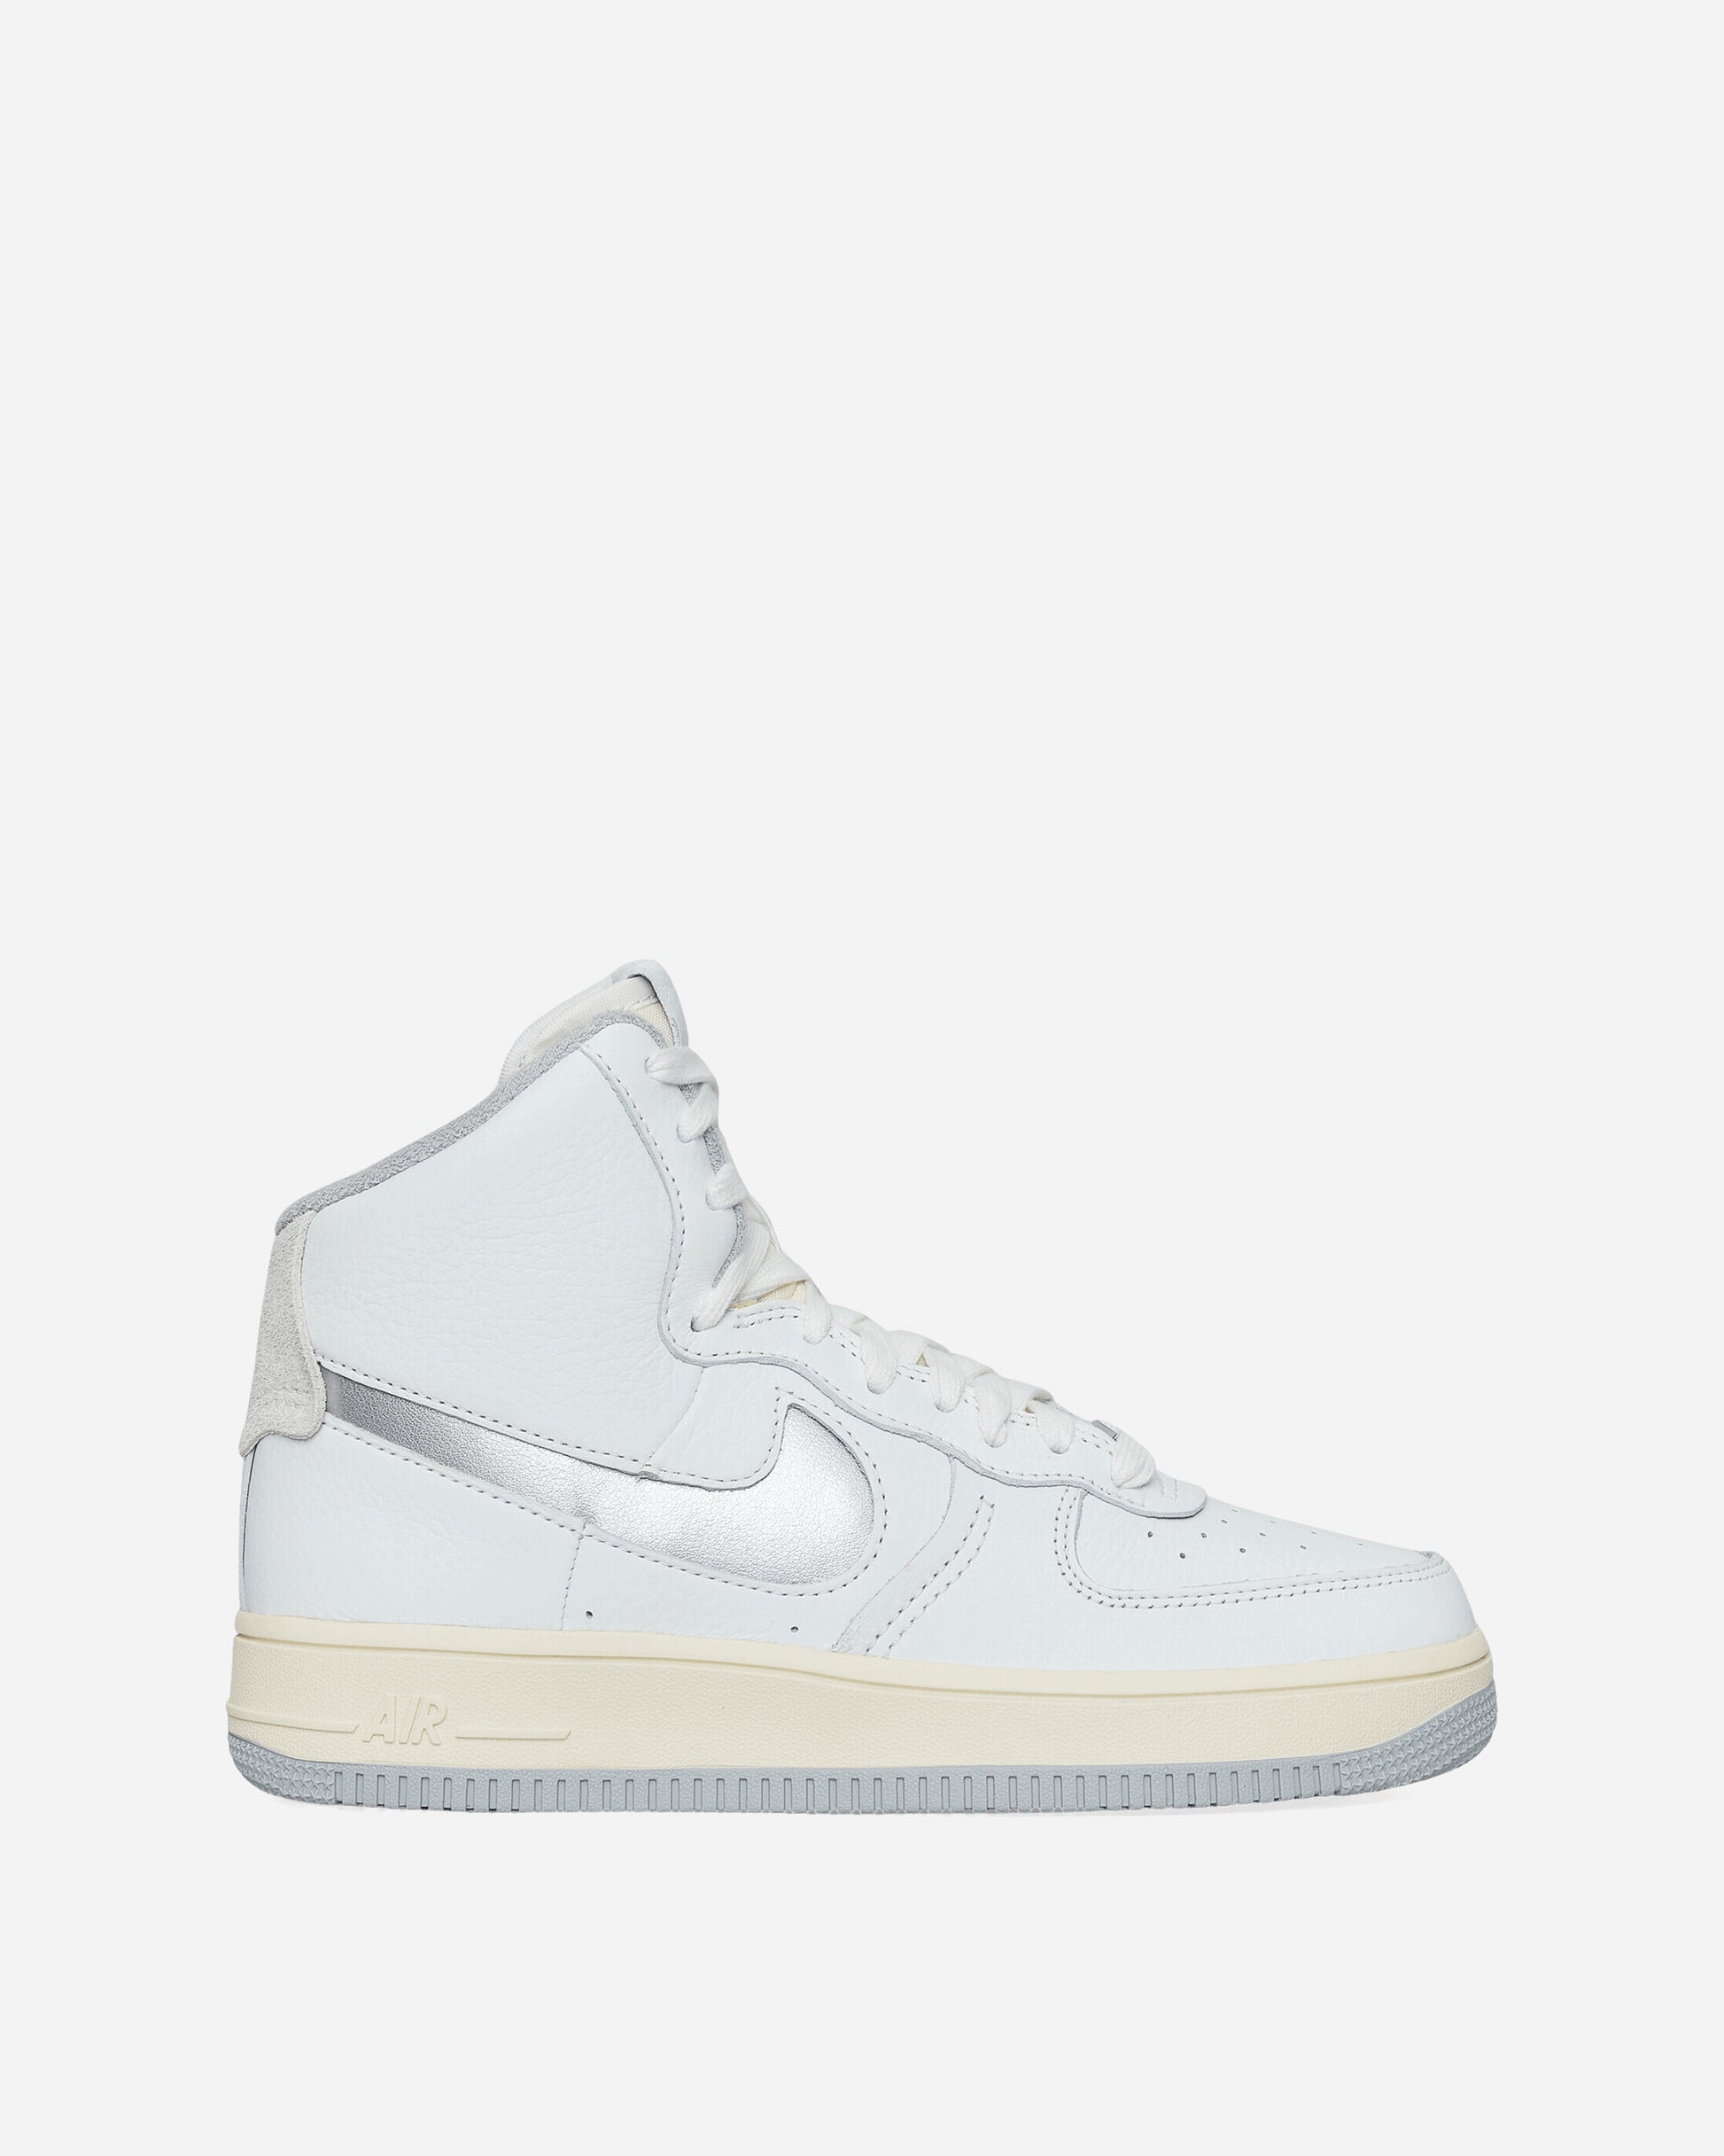 Nike Wmns Af1 Sculpt Summit White/Silver Sneakers High DC3590-101